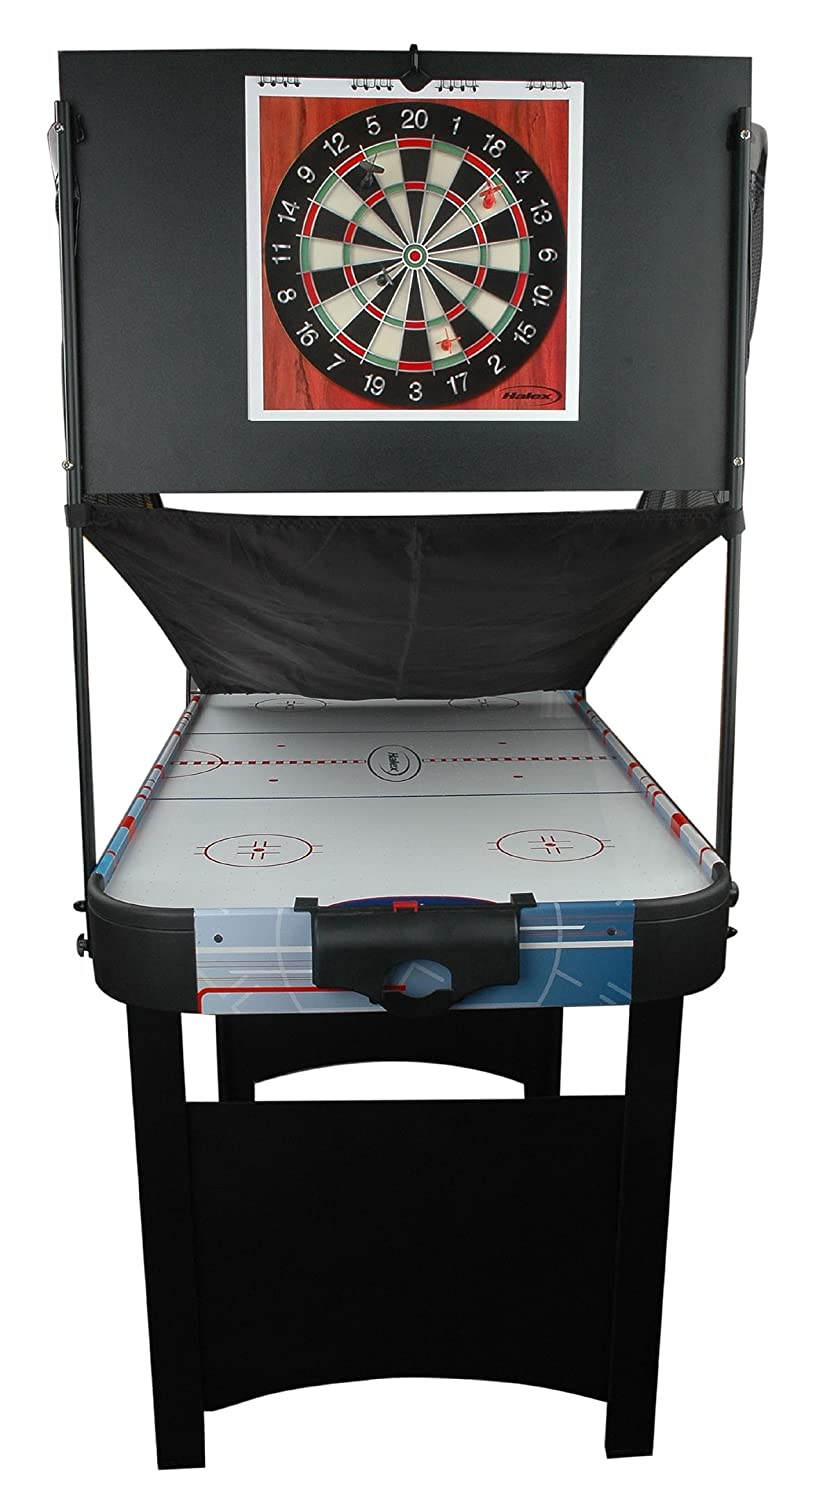 Halex Crossover 48-Inch 12-in-1 Combination Table - The Best Of Halex Air Hockey Table Models